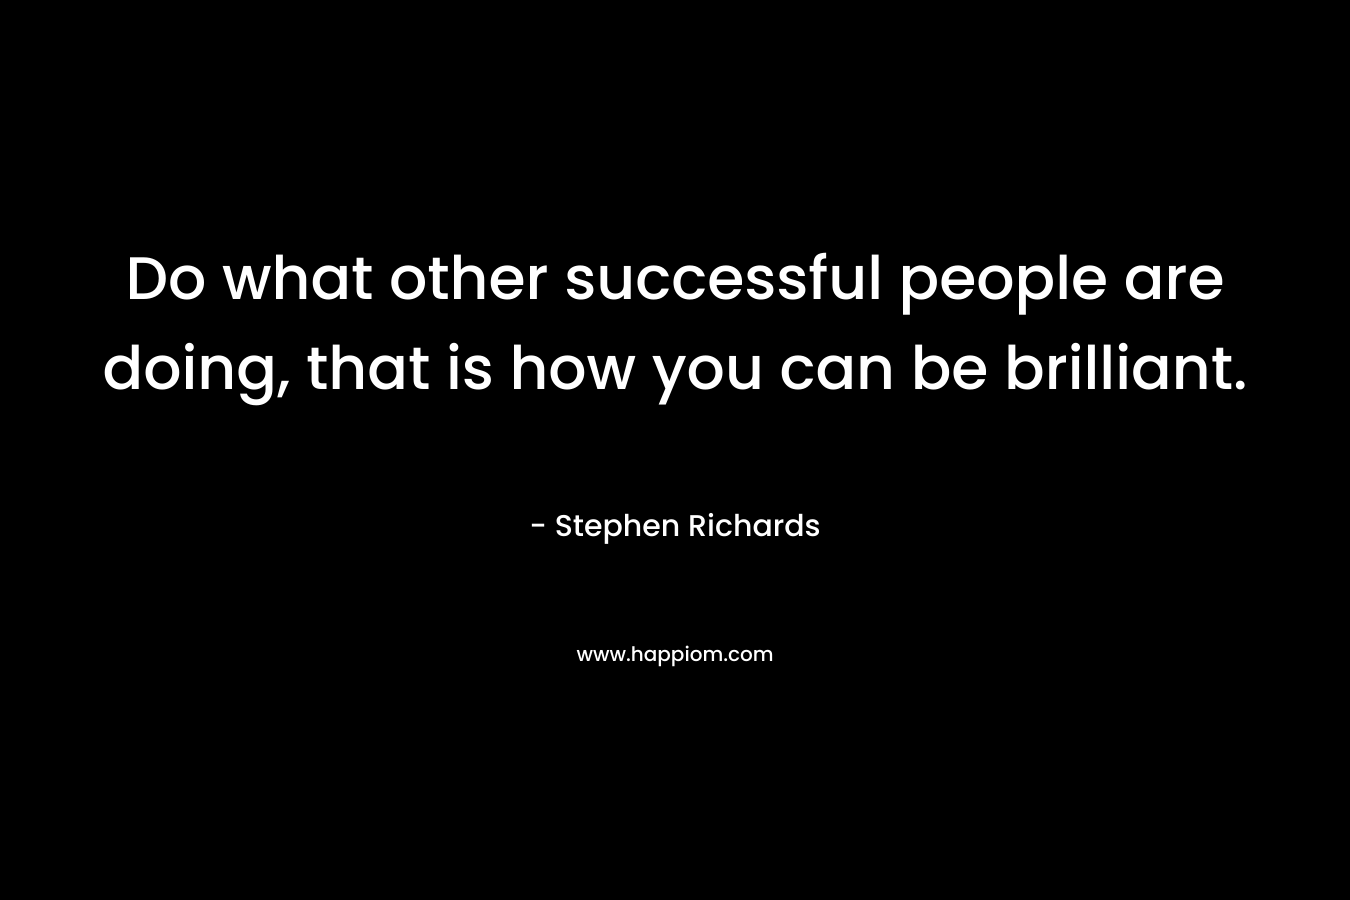 Do what other successful people are doing, that is how you can be brilliant.